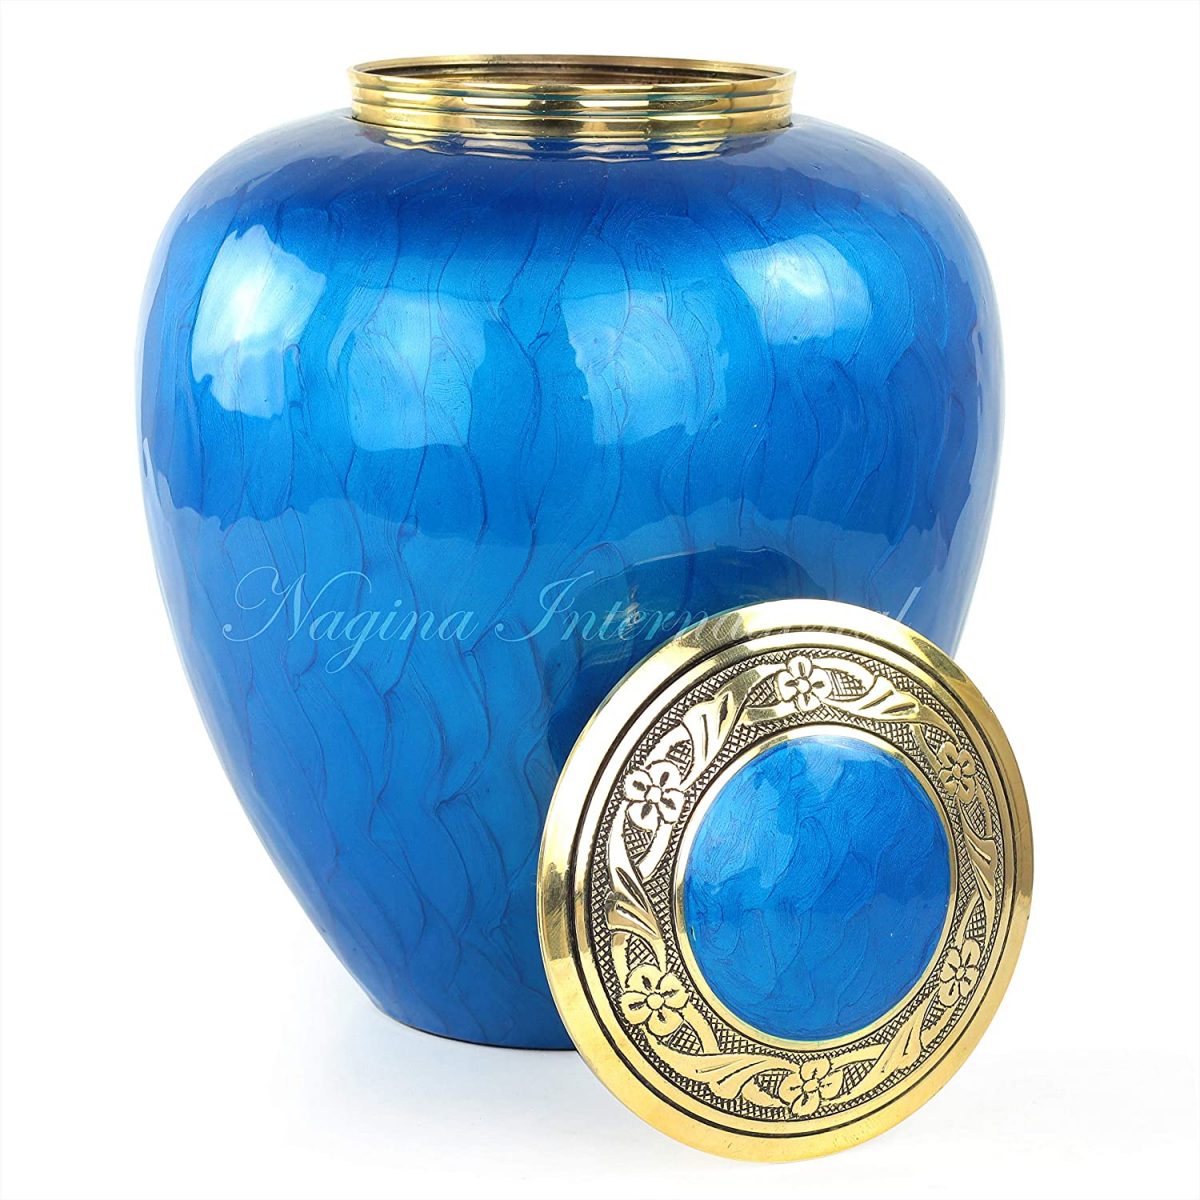 Nagina International 9.5" Blue Aluminum Metal Cremation Urns for Ashes & Mortal Remains with Golden Yellow Engraved Lid | Handmade Beautiful Urns for Humans and Pets (Finny Blue)